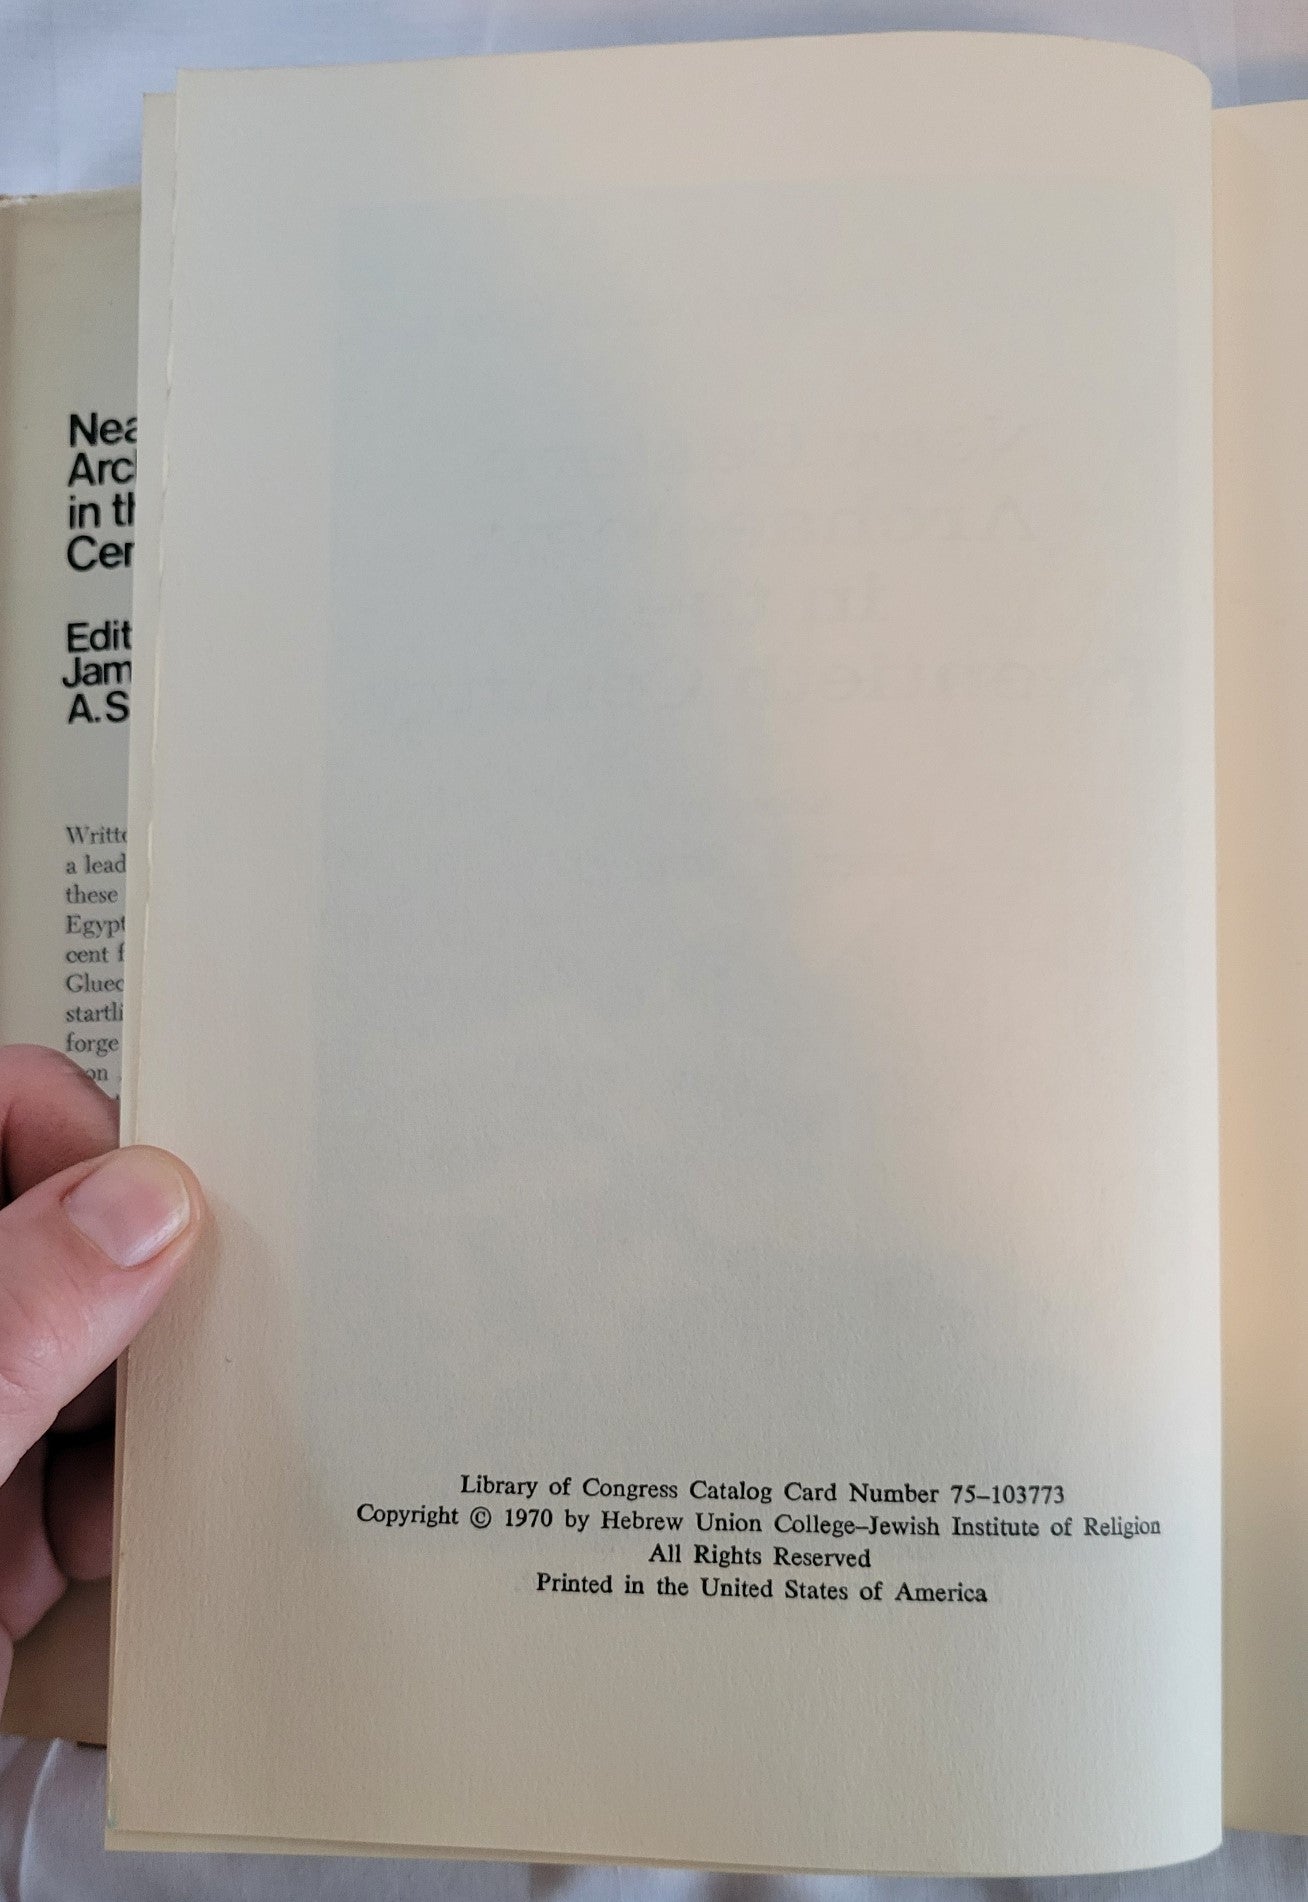 Used book for sale, “Near Eastern Archaeology in the Twentieth Century” edited by James A. Sanders, written in honor of Nelson Glueck. View of copyright info.